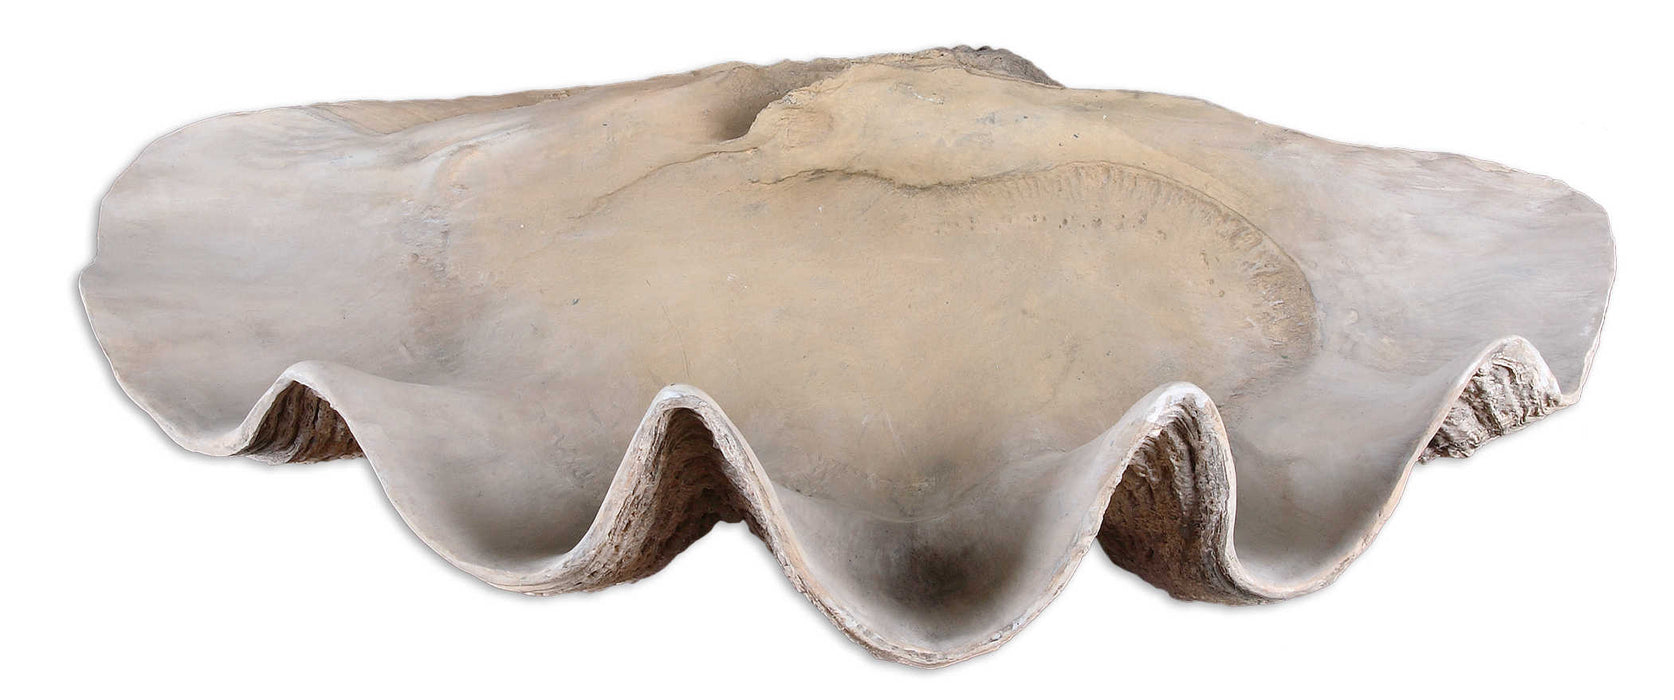 Uttermost - Clam Shell Bowl - 19800